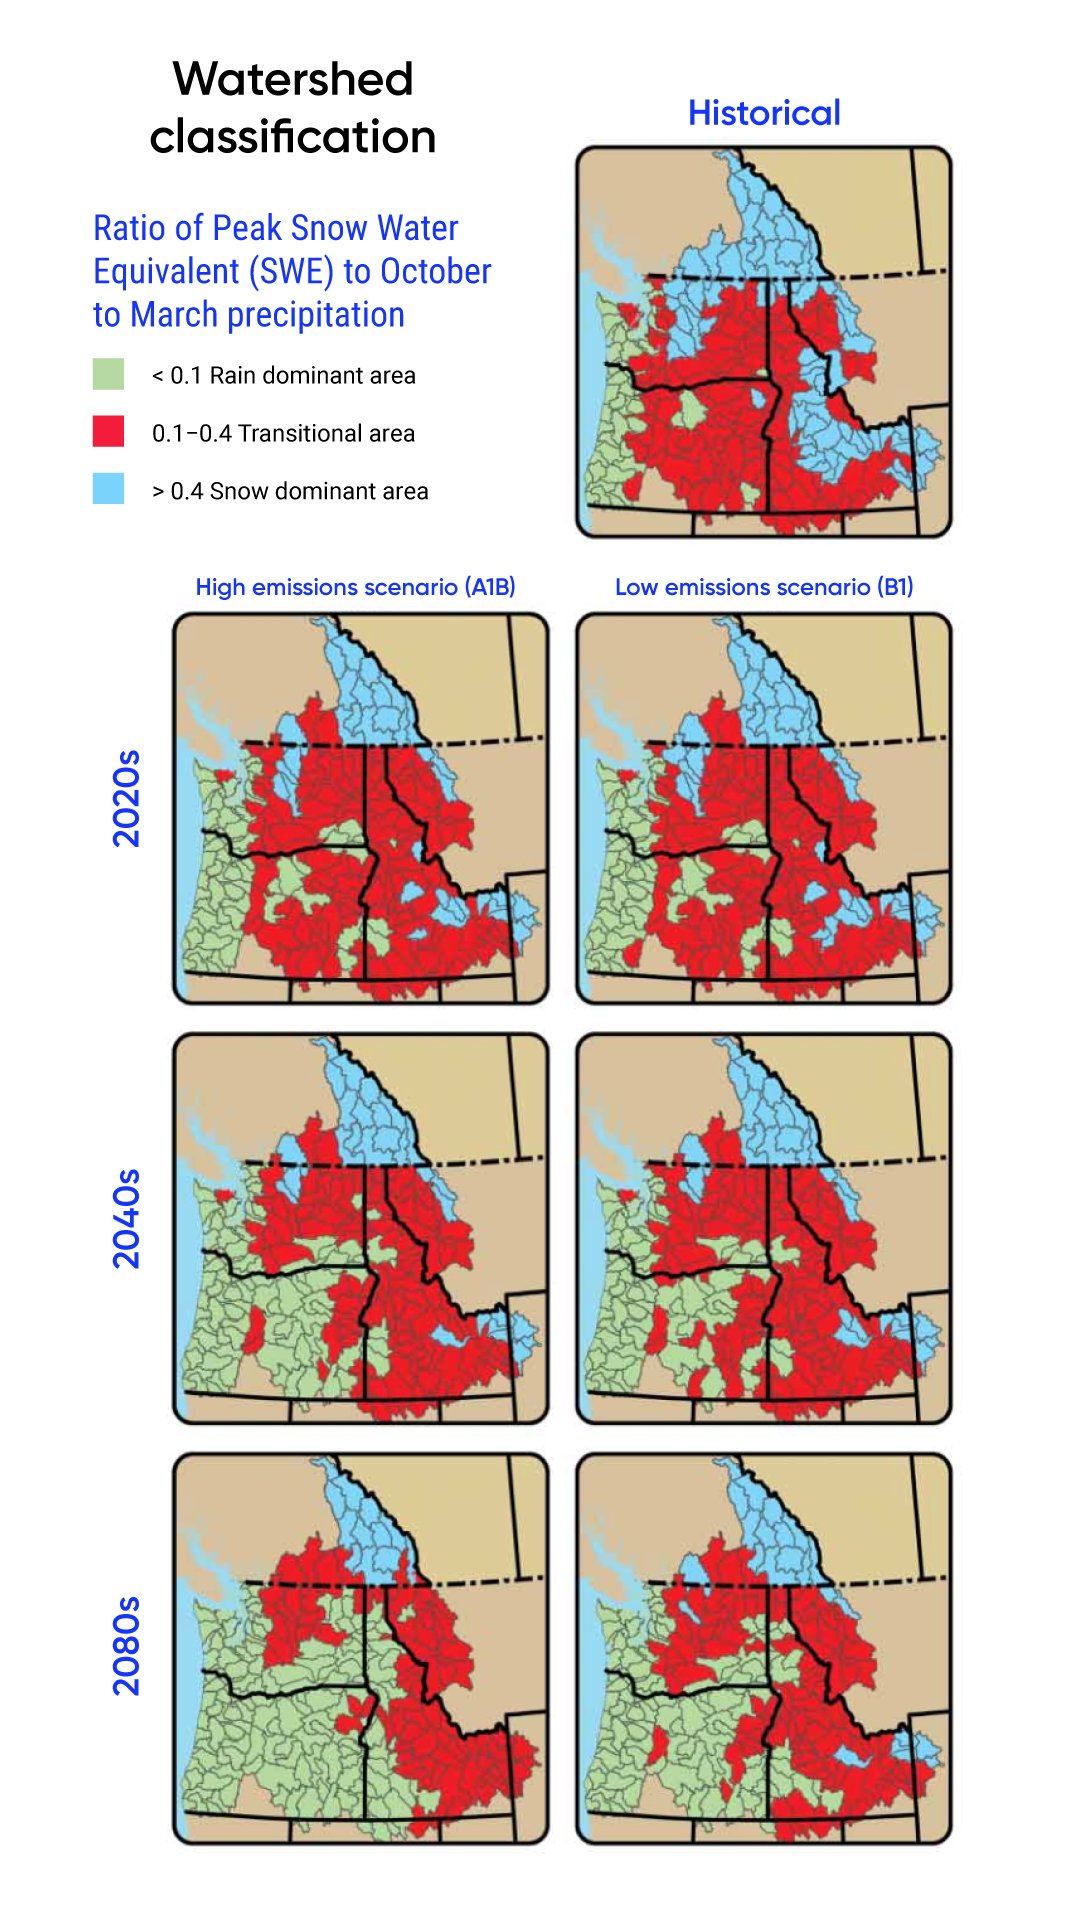 Maps of the Columbia Basin with historical and projected future watershed classifications. Under both a high emissions scenario and a low emissions scenario, the rain dominant area, historically on the coast of Oregon and Washington, will grow towards the east. The transitional area will shrink to accommodate the larger rain dominant area. The snow dominant area, historically in interior British Columbia, northern Washington, and central Idaho, will recede from Washington and Idaho but remain in British Columbia.